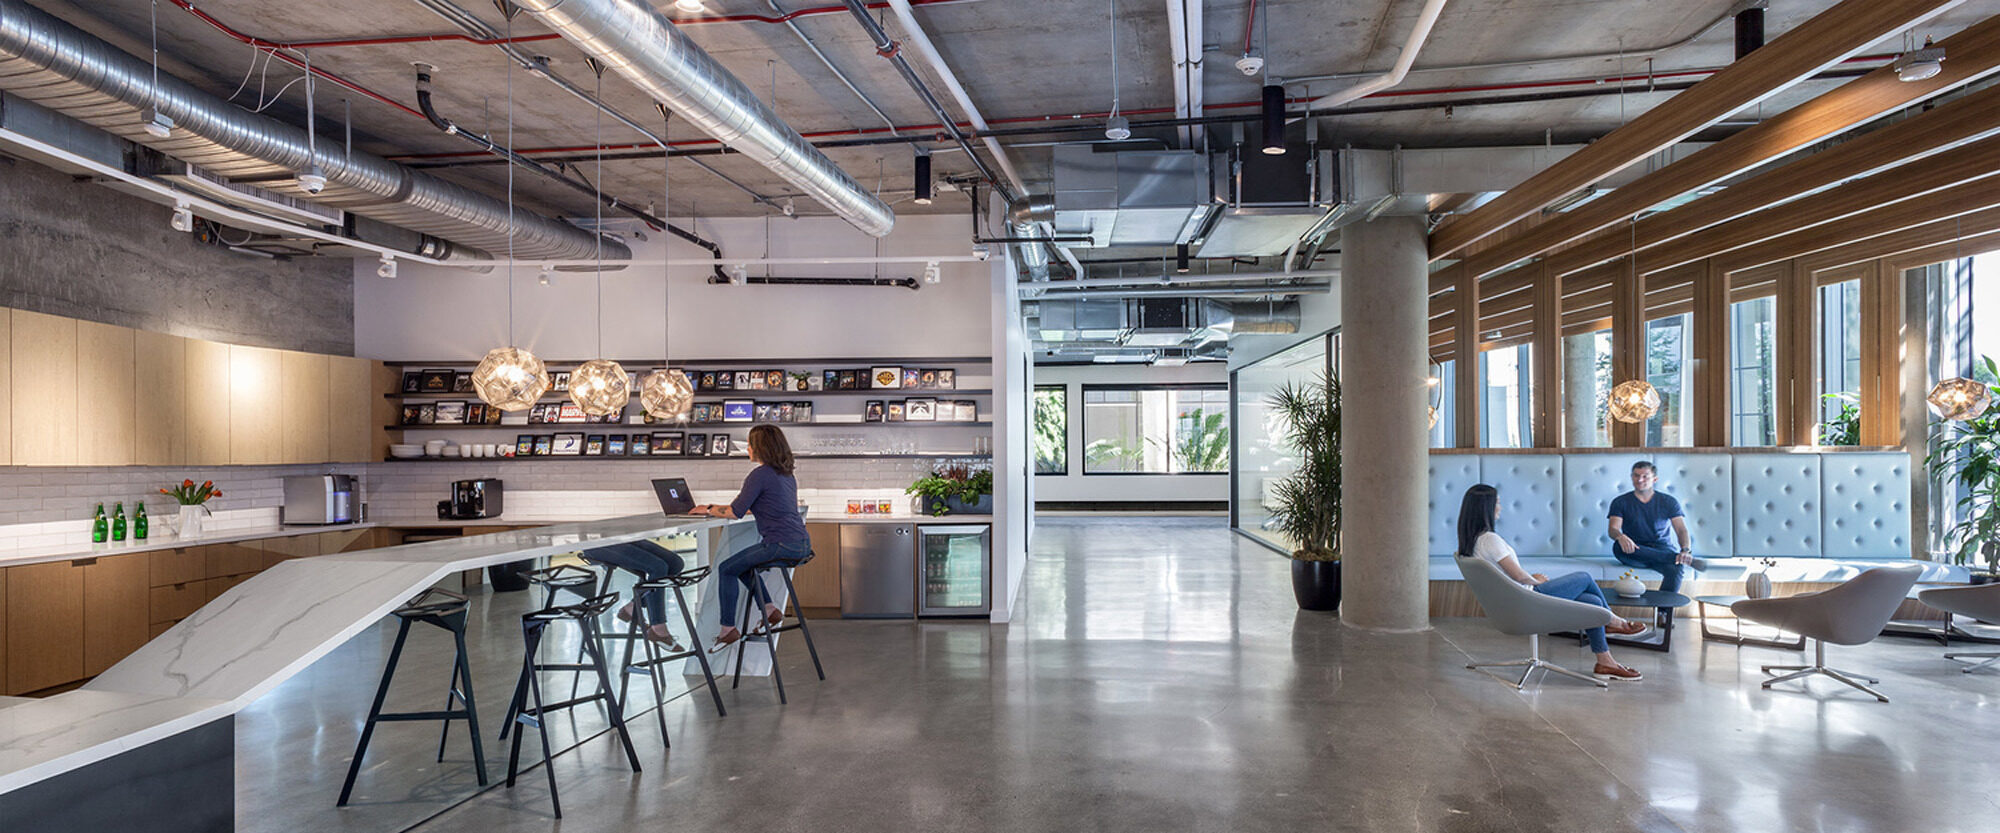 Open-concept office space featuring exposed ceiling beams, polished concrete floors, and a kitchenette with wooden accents. Pendant lighting illuminates the bar seating area, while employees engage in casual conversations in a lounge setting with modern chairs and coffee tables.